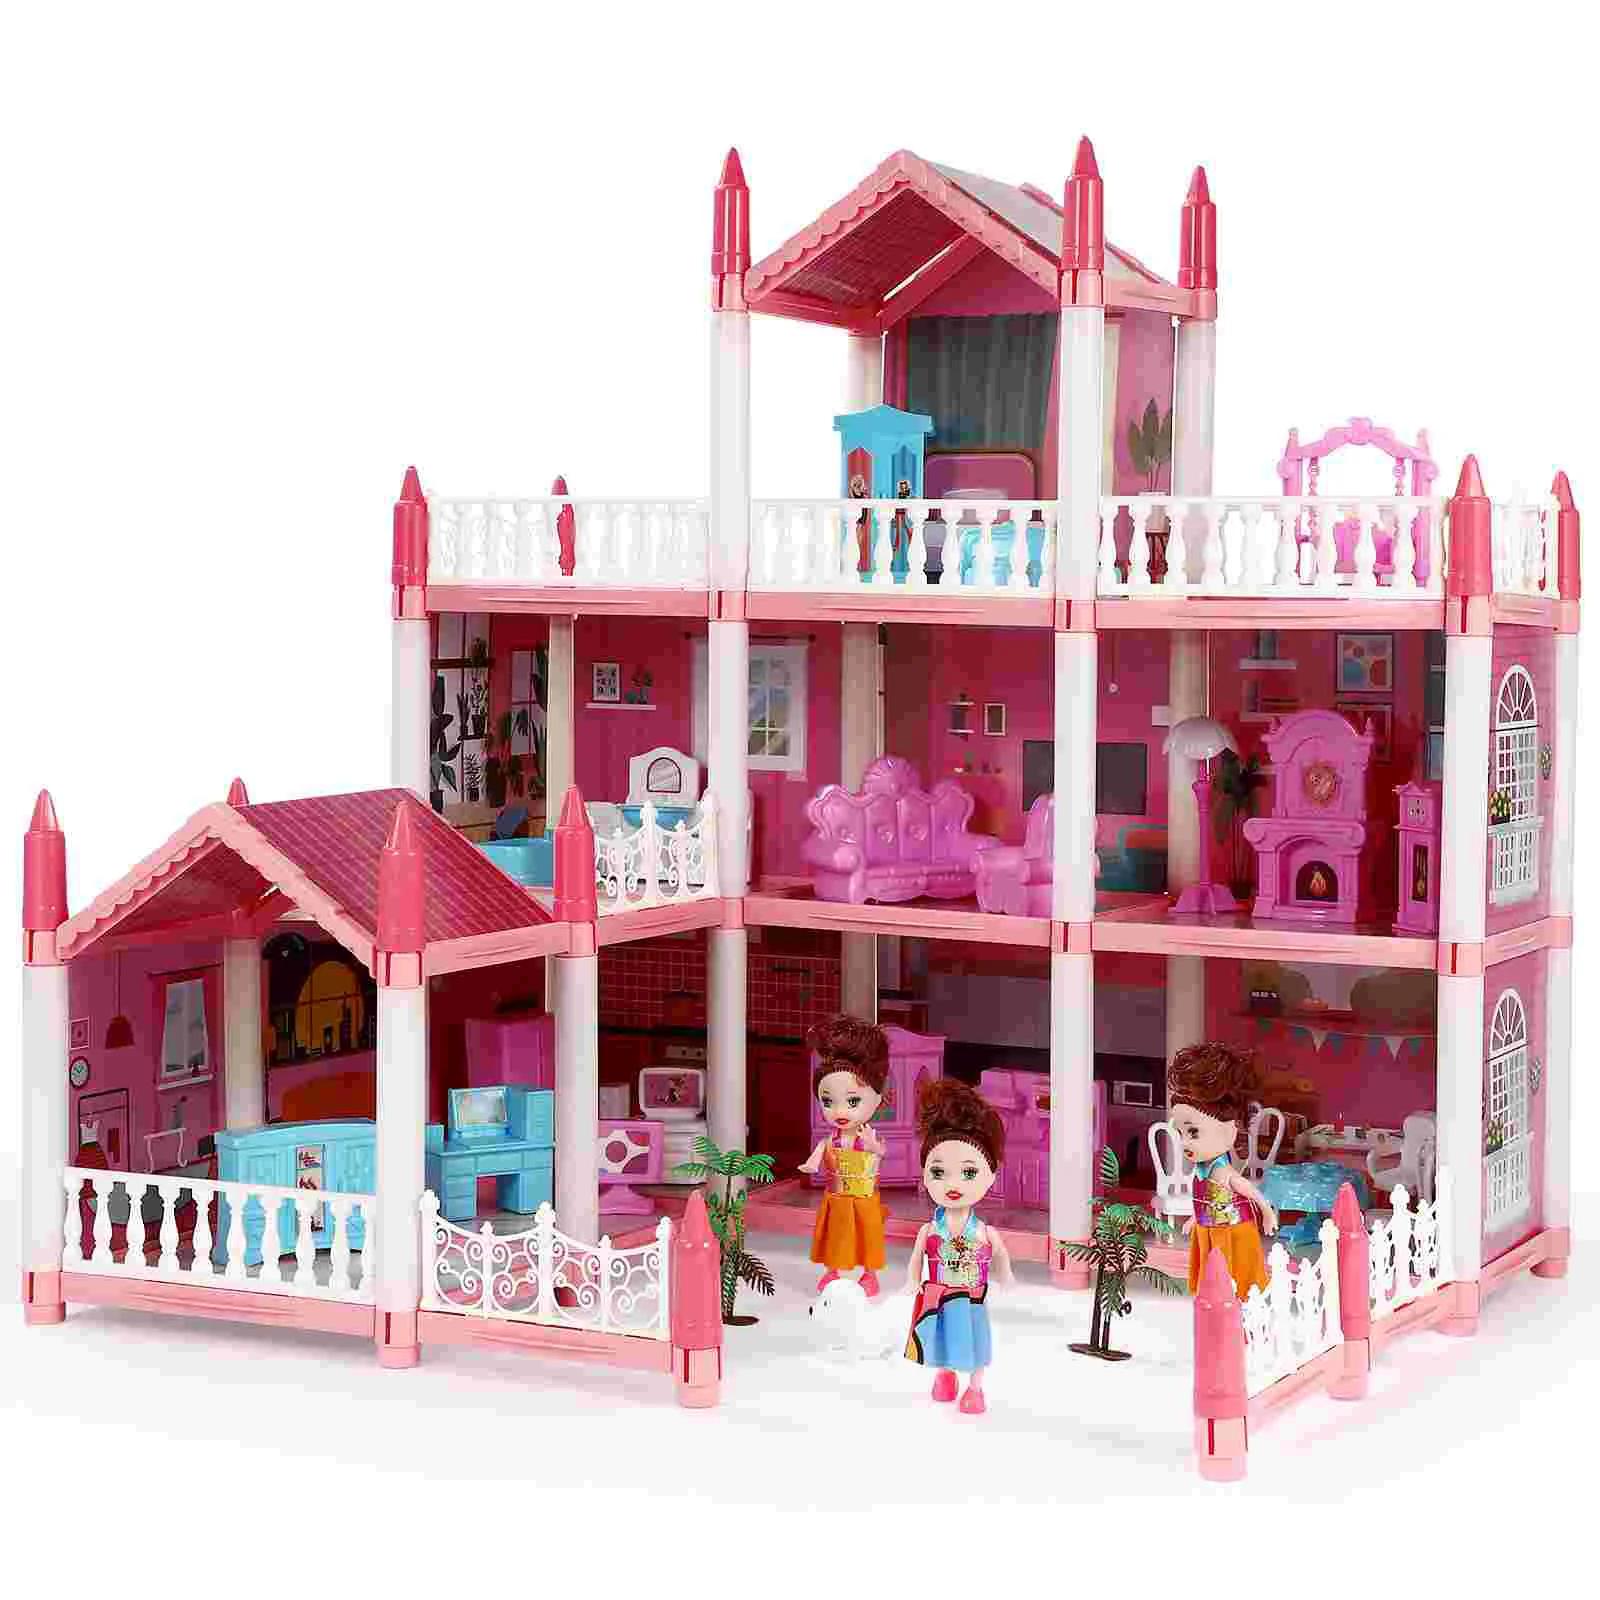 

House For Girls Toy Princess Room With Furniture Accessories Pp 3 Stories Houses Indoor Toddler Doll's